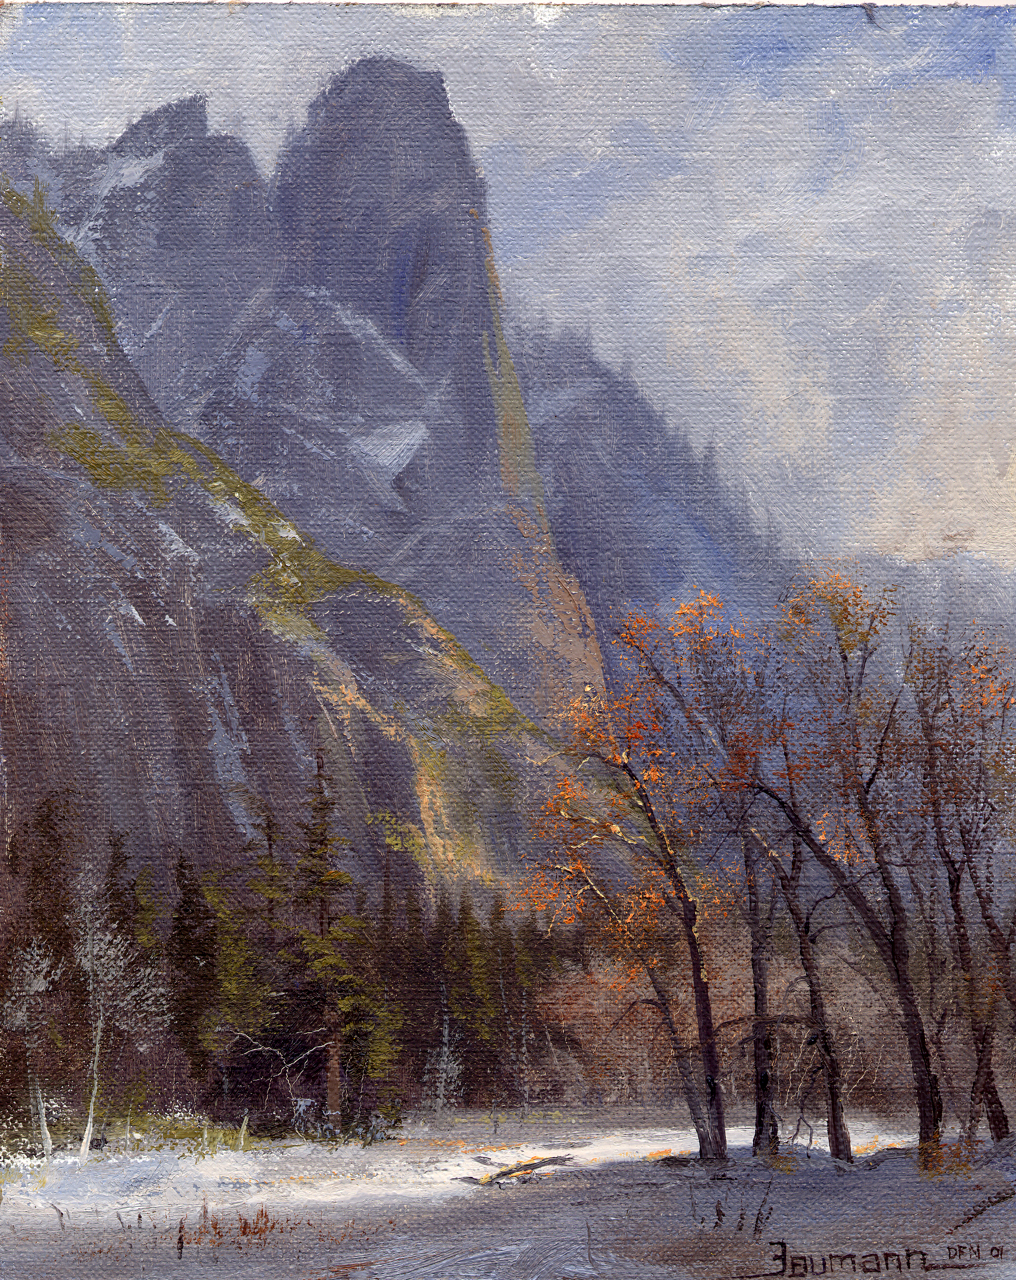 Yosemite, Christmas Day. Oil on canvas, one of several Christmas paintings by Stefan Baumann